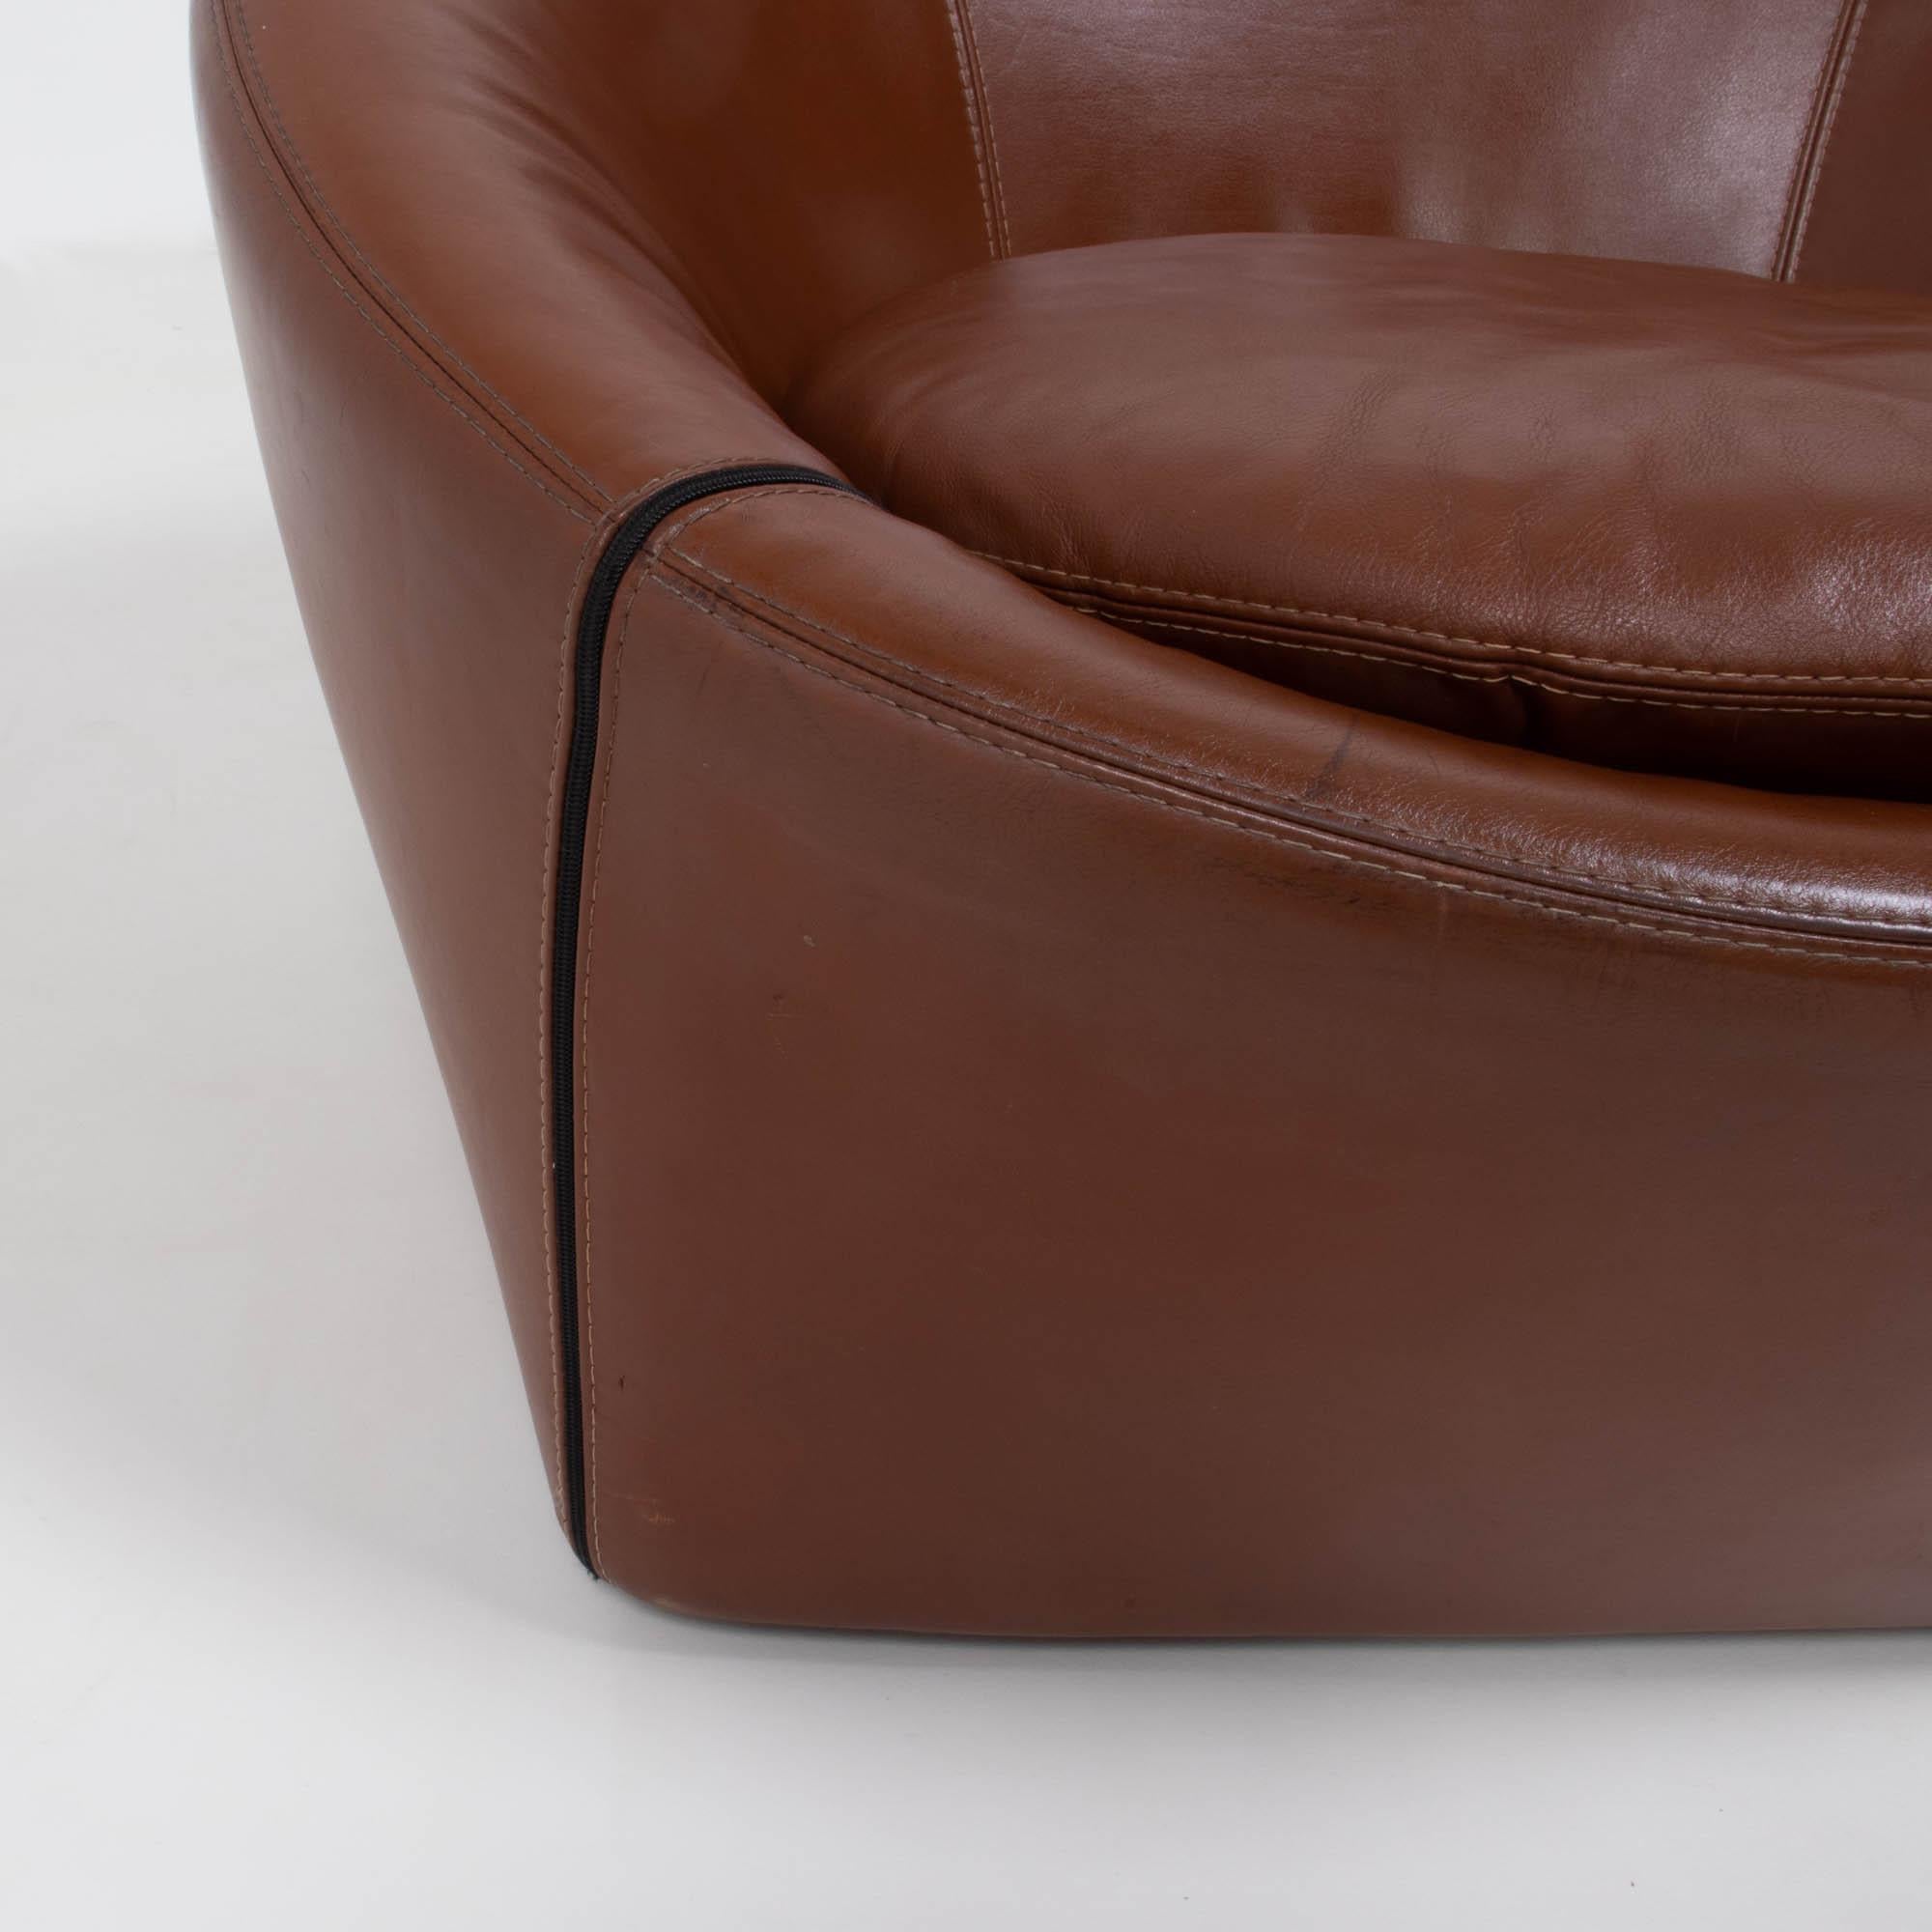 Minotti by Gordon Guillaumier Brown Leather Capri Armchairs, Set of 2, 2005 6